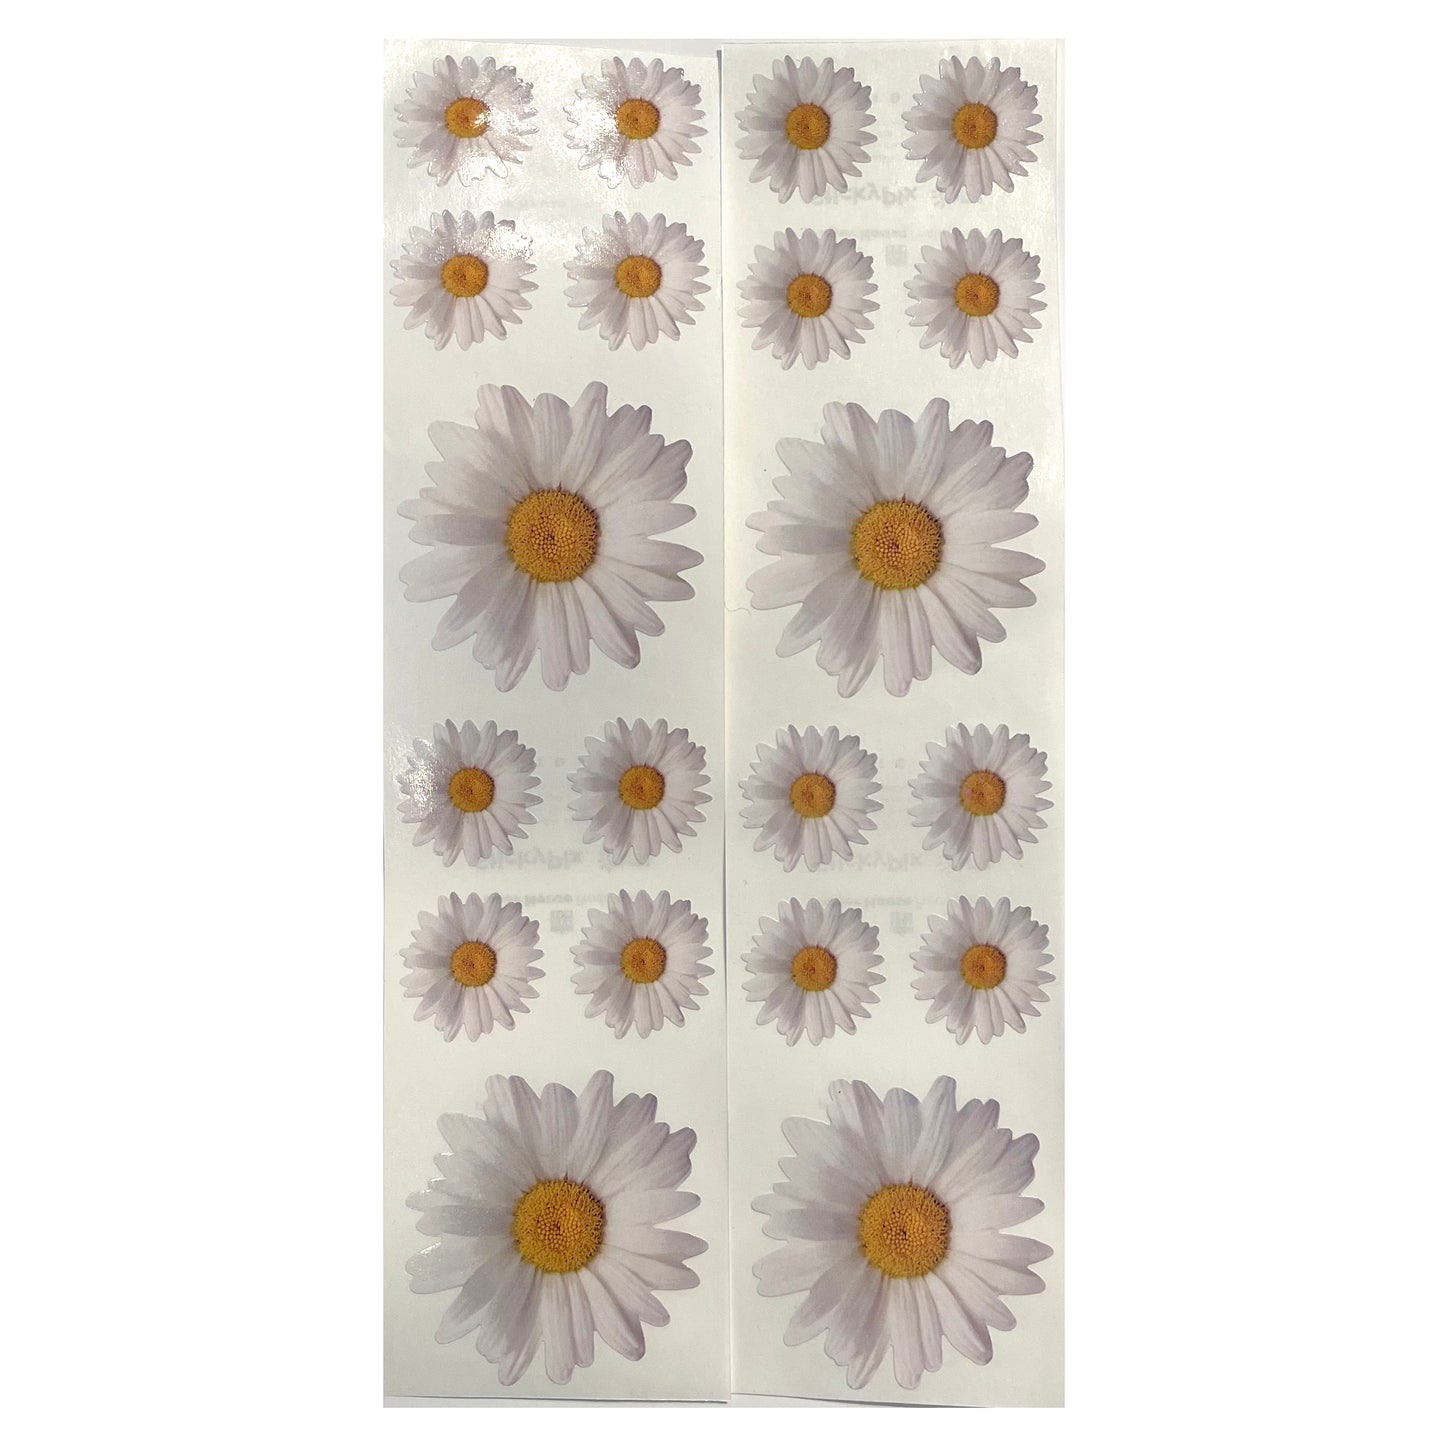 Paper House: Photoreal White Daisy stickers